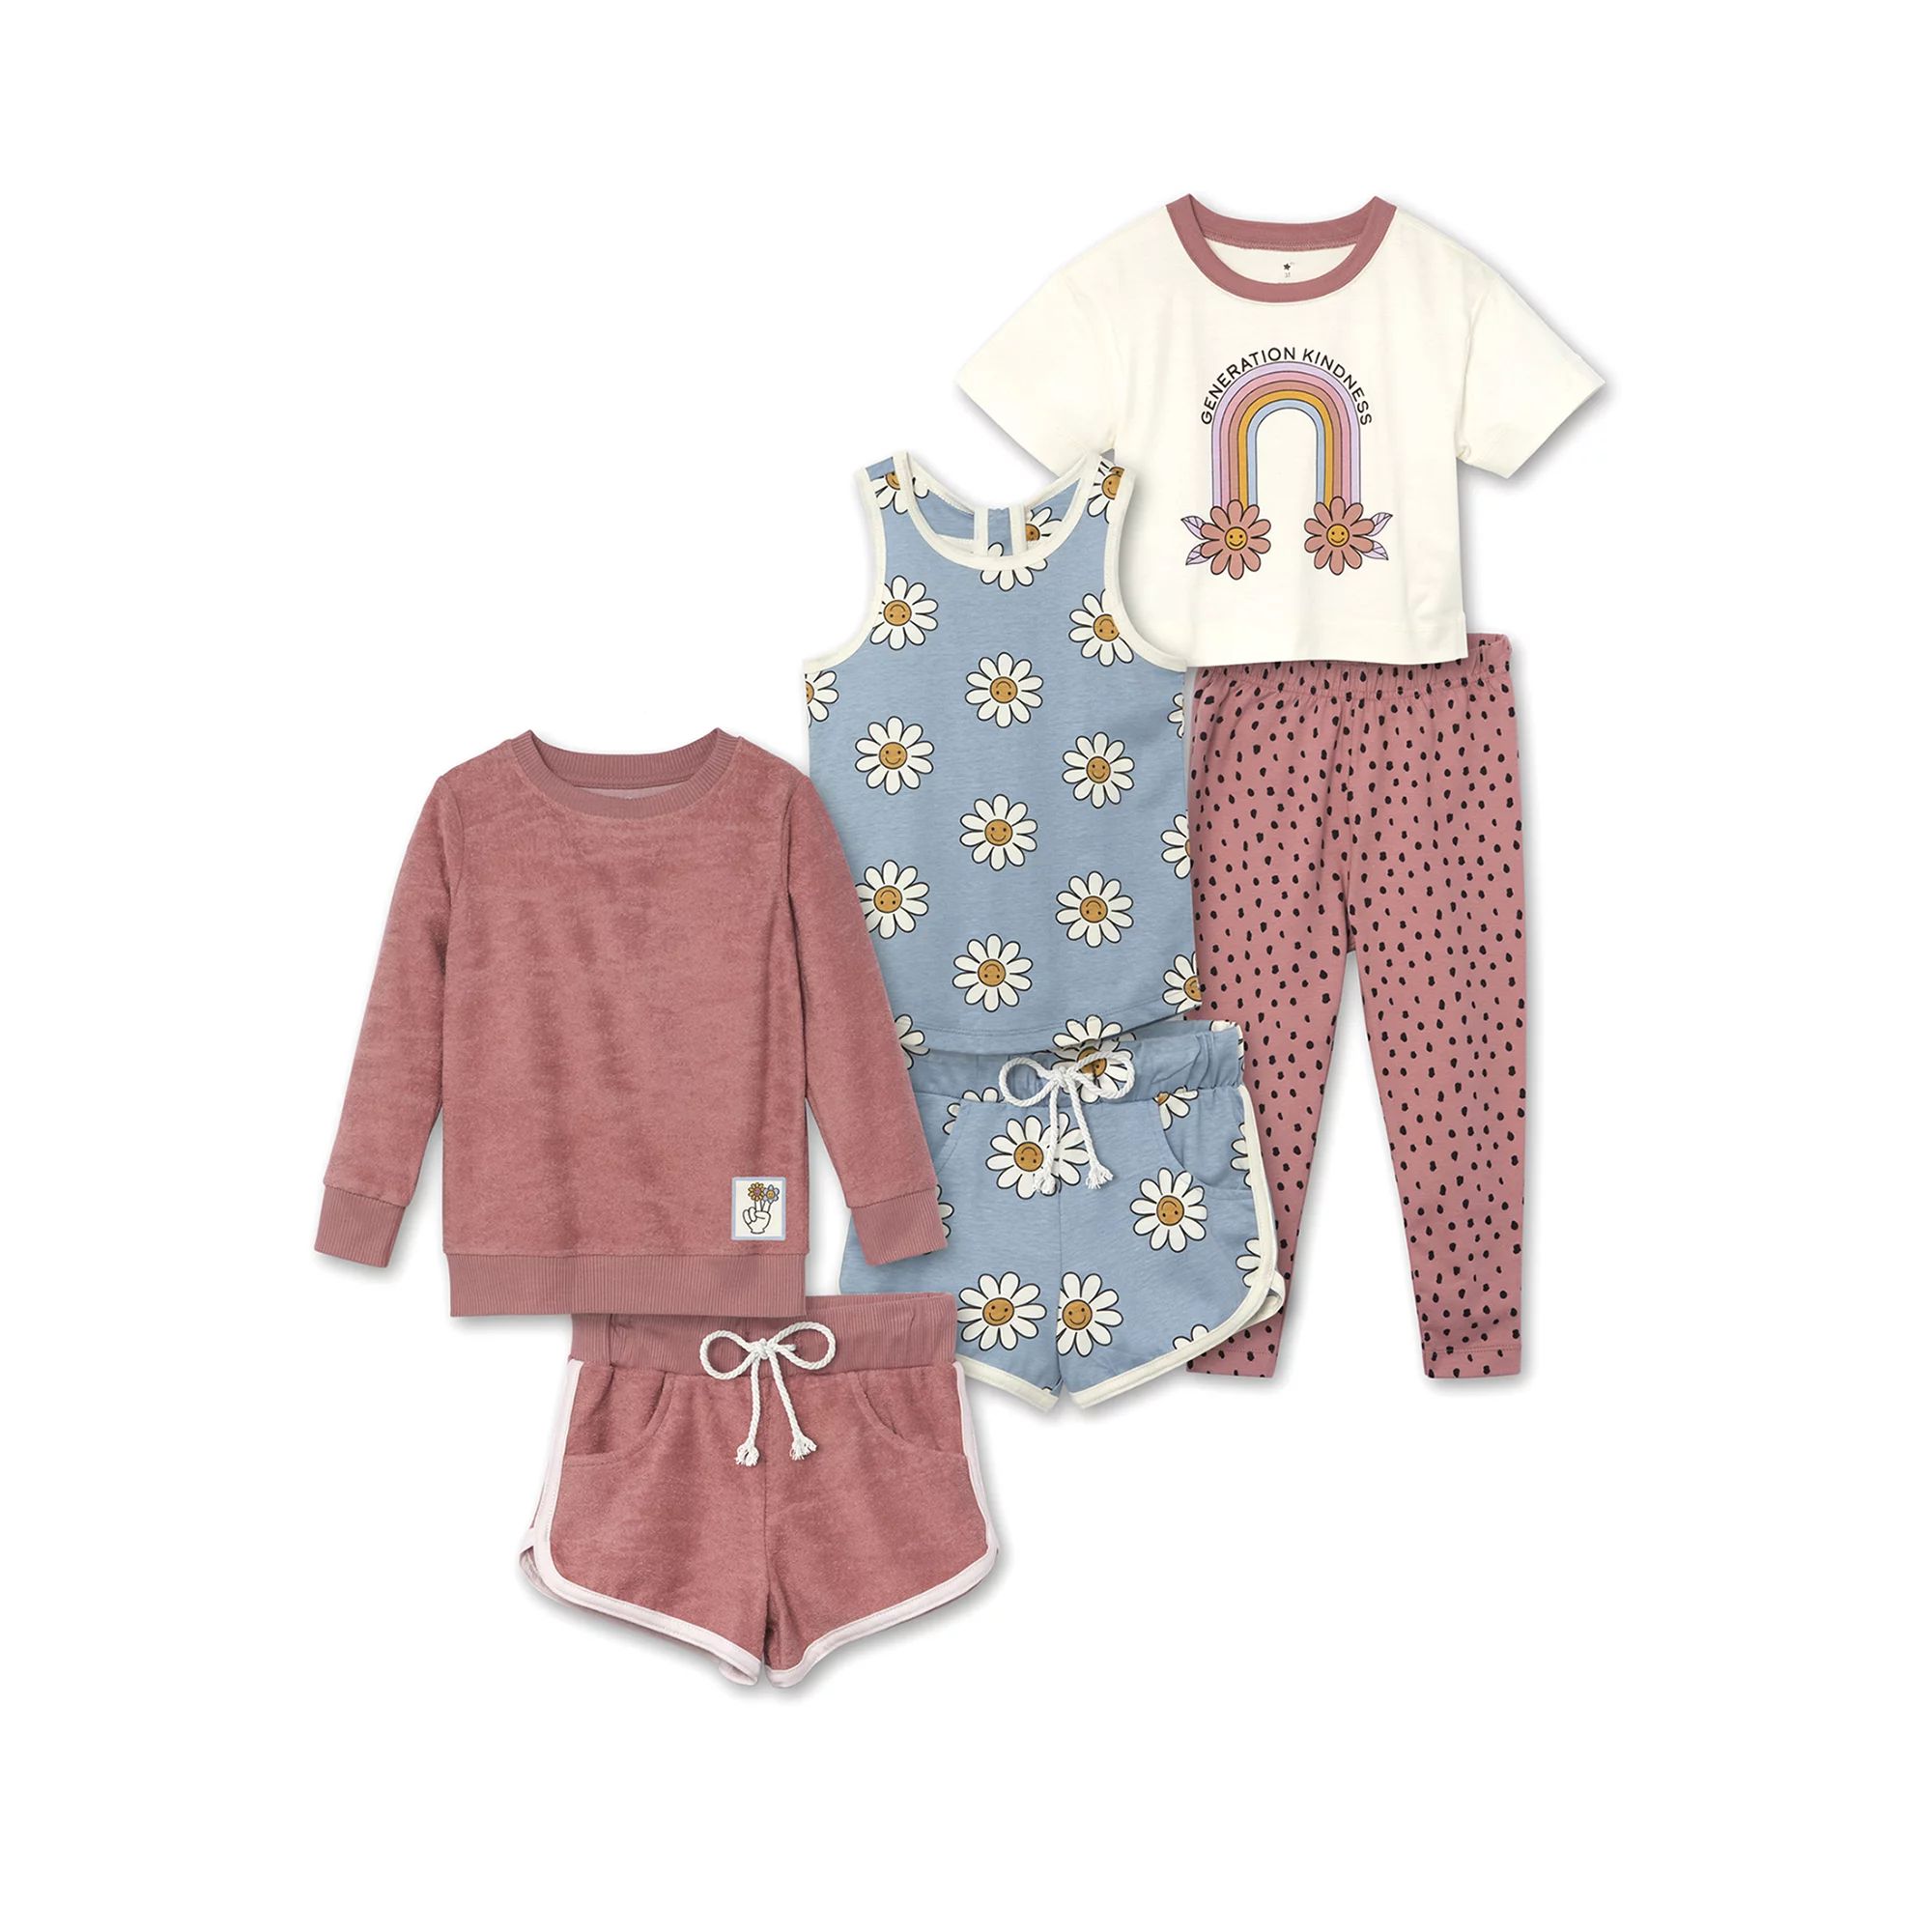 Little Star Organic Toddler Girl 6Pc Outfit Set, Size 12M-5T | Walmart (US)